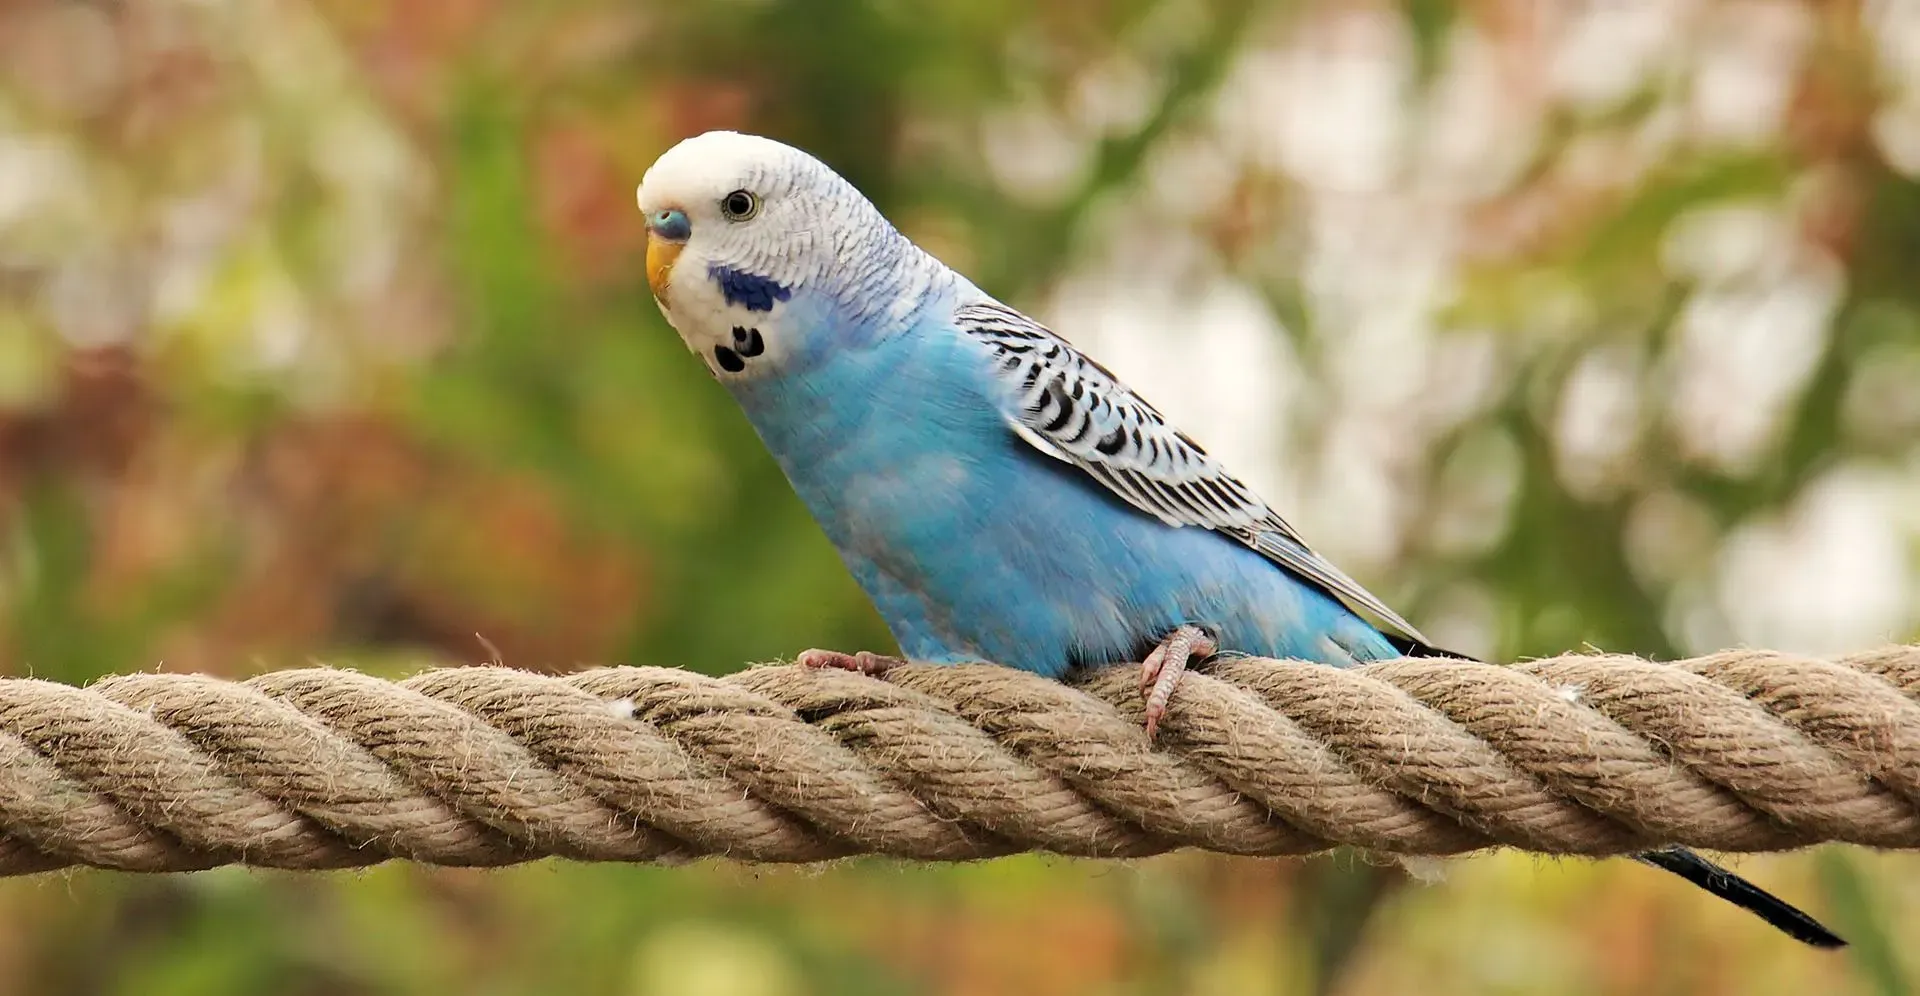 Discover the answer for can parakeets talk or not and learn many interesting facts!